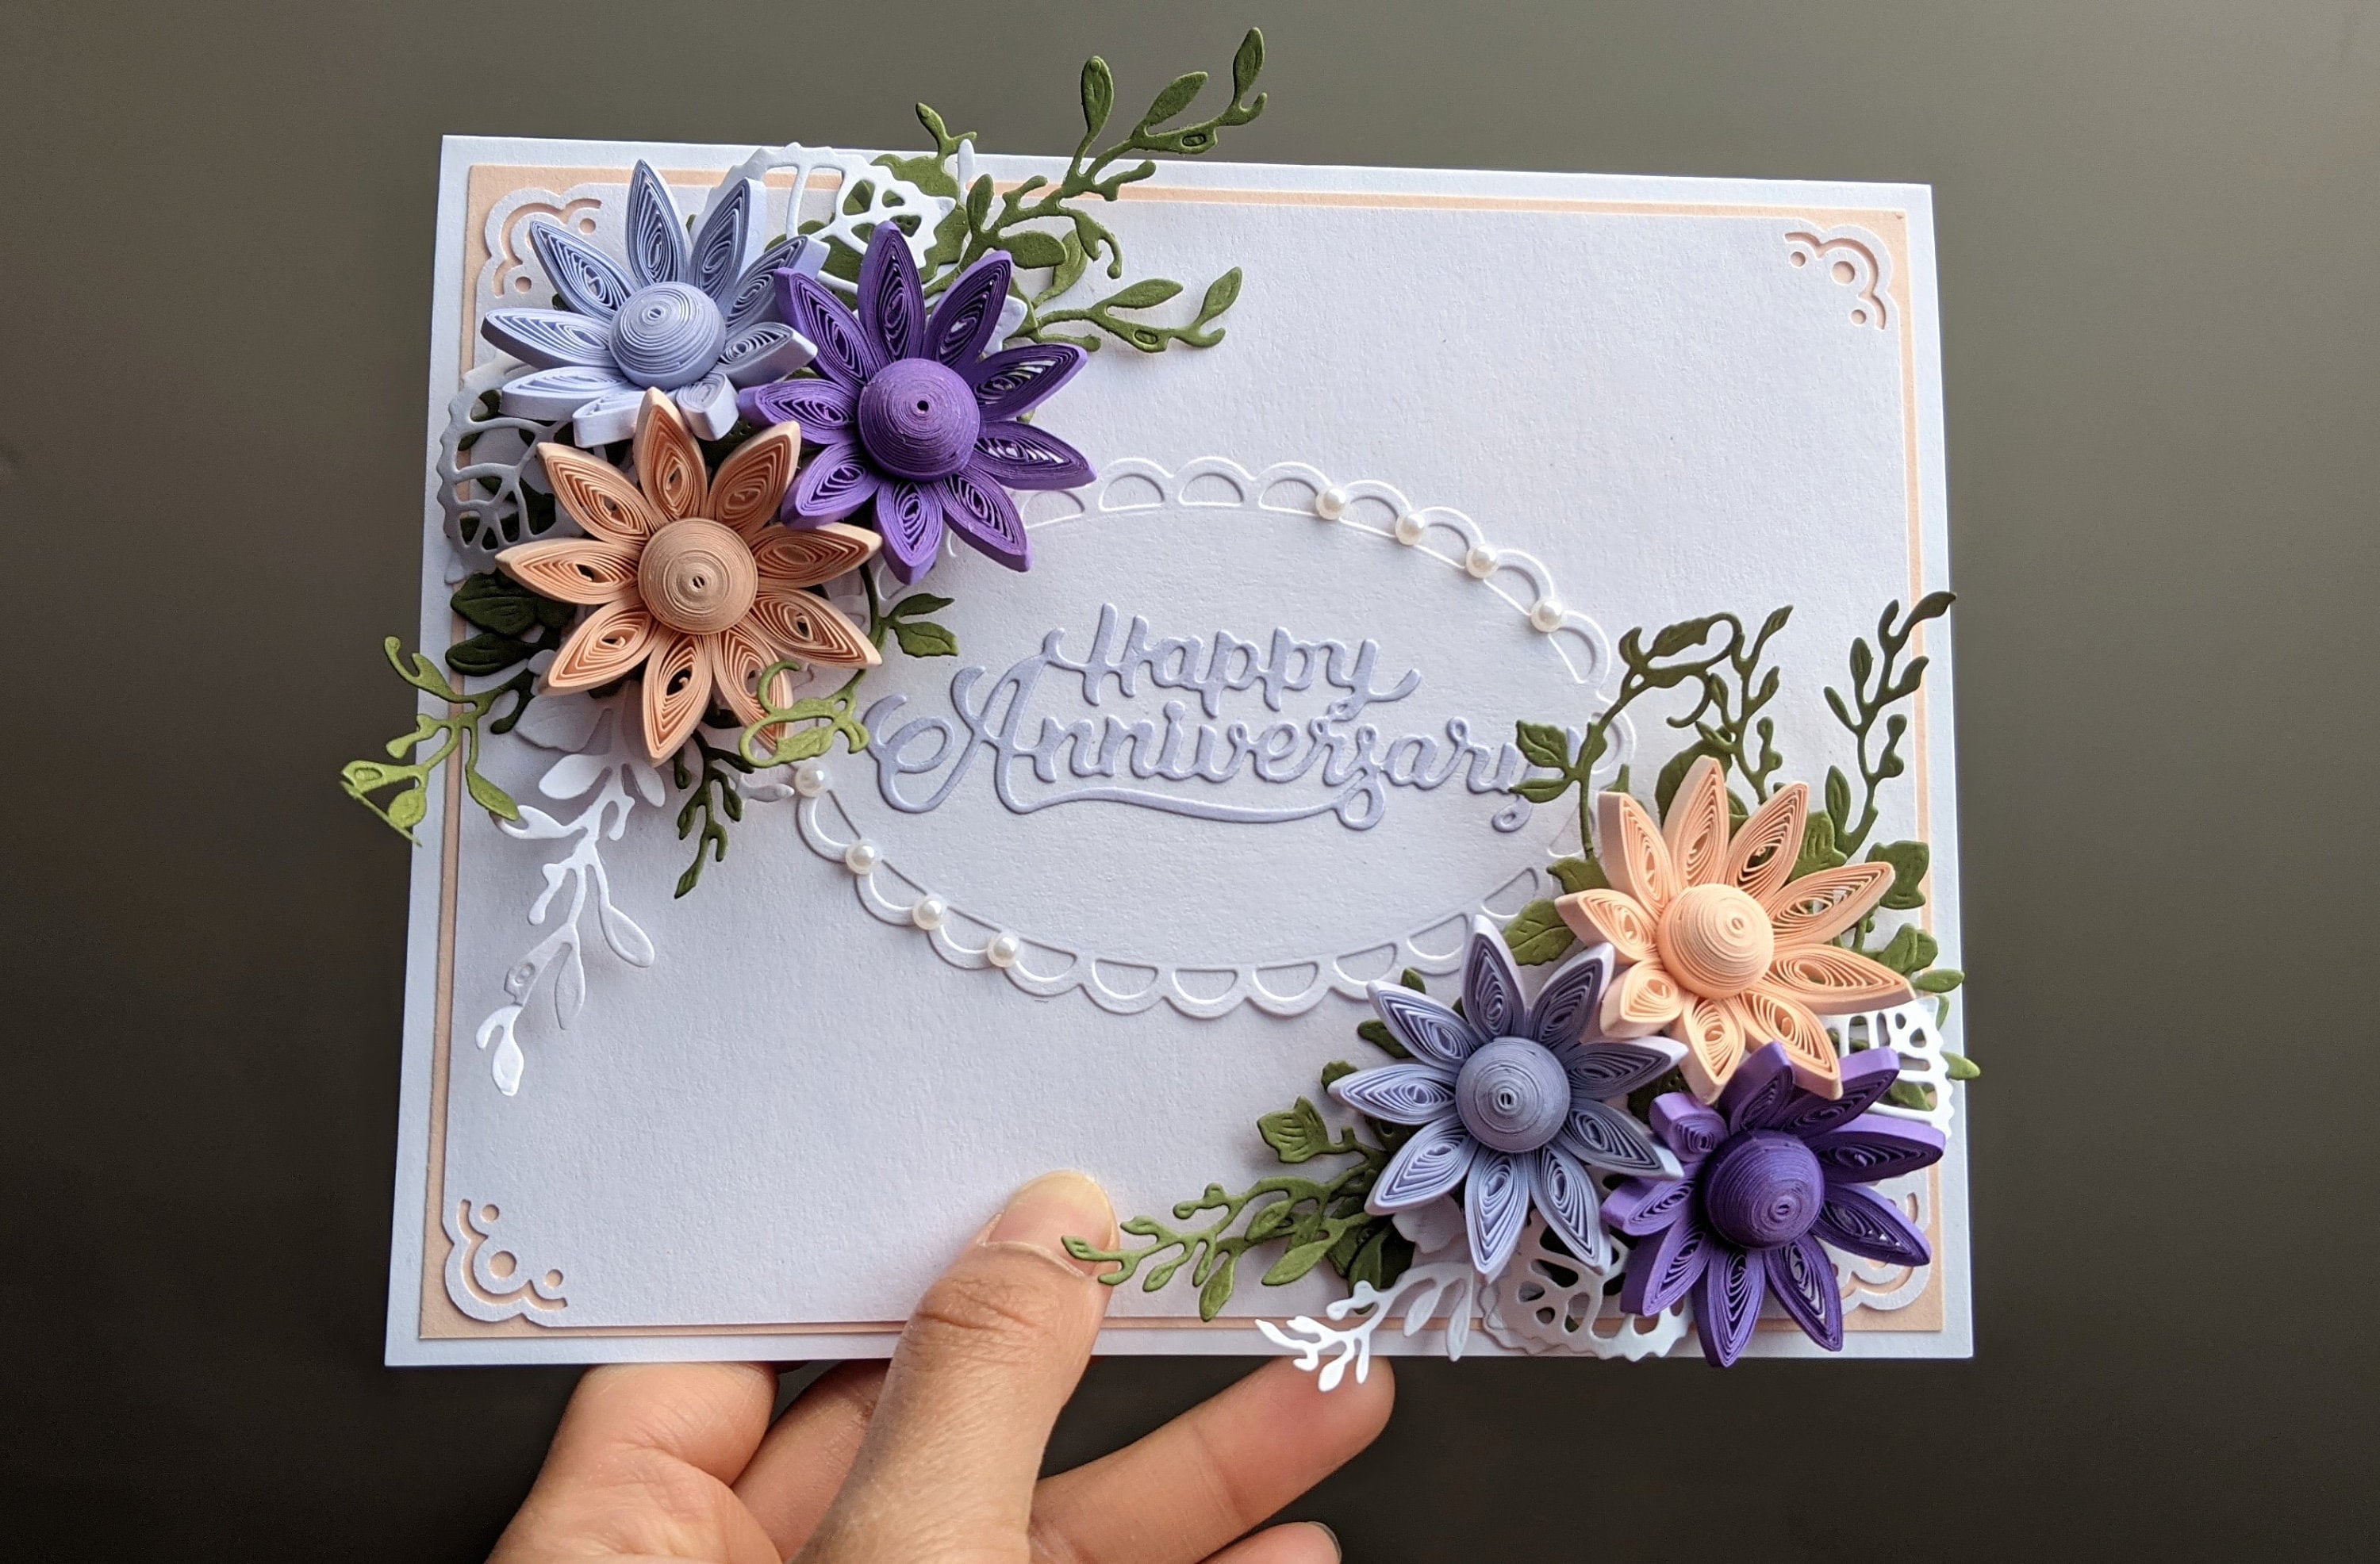 Quilling Paper Flowers Greeting Card, Birthday Card, Mother's Day